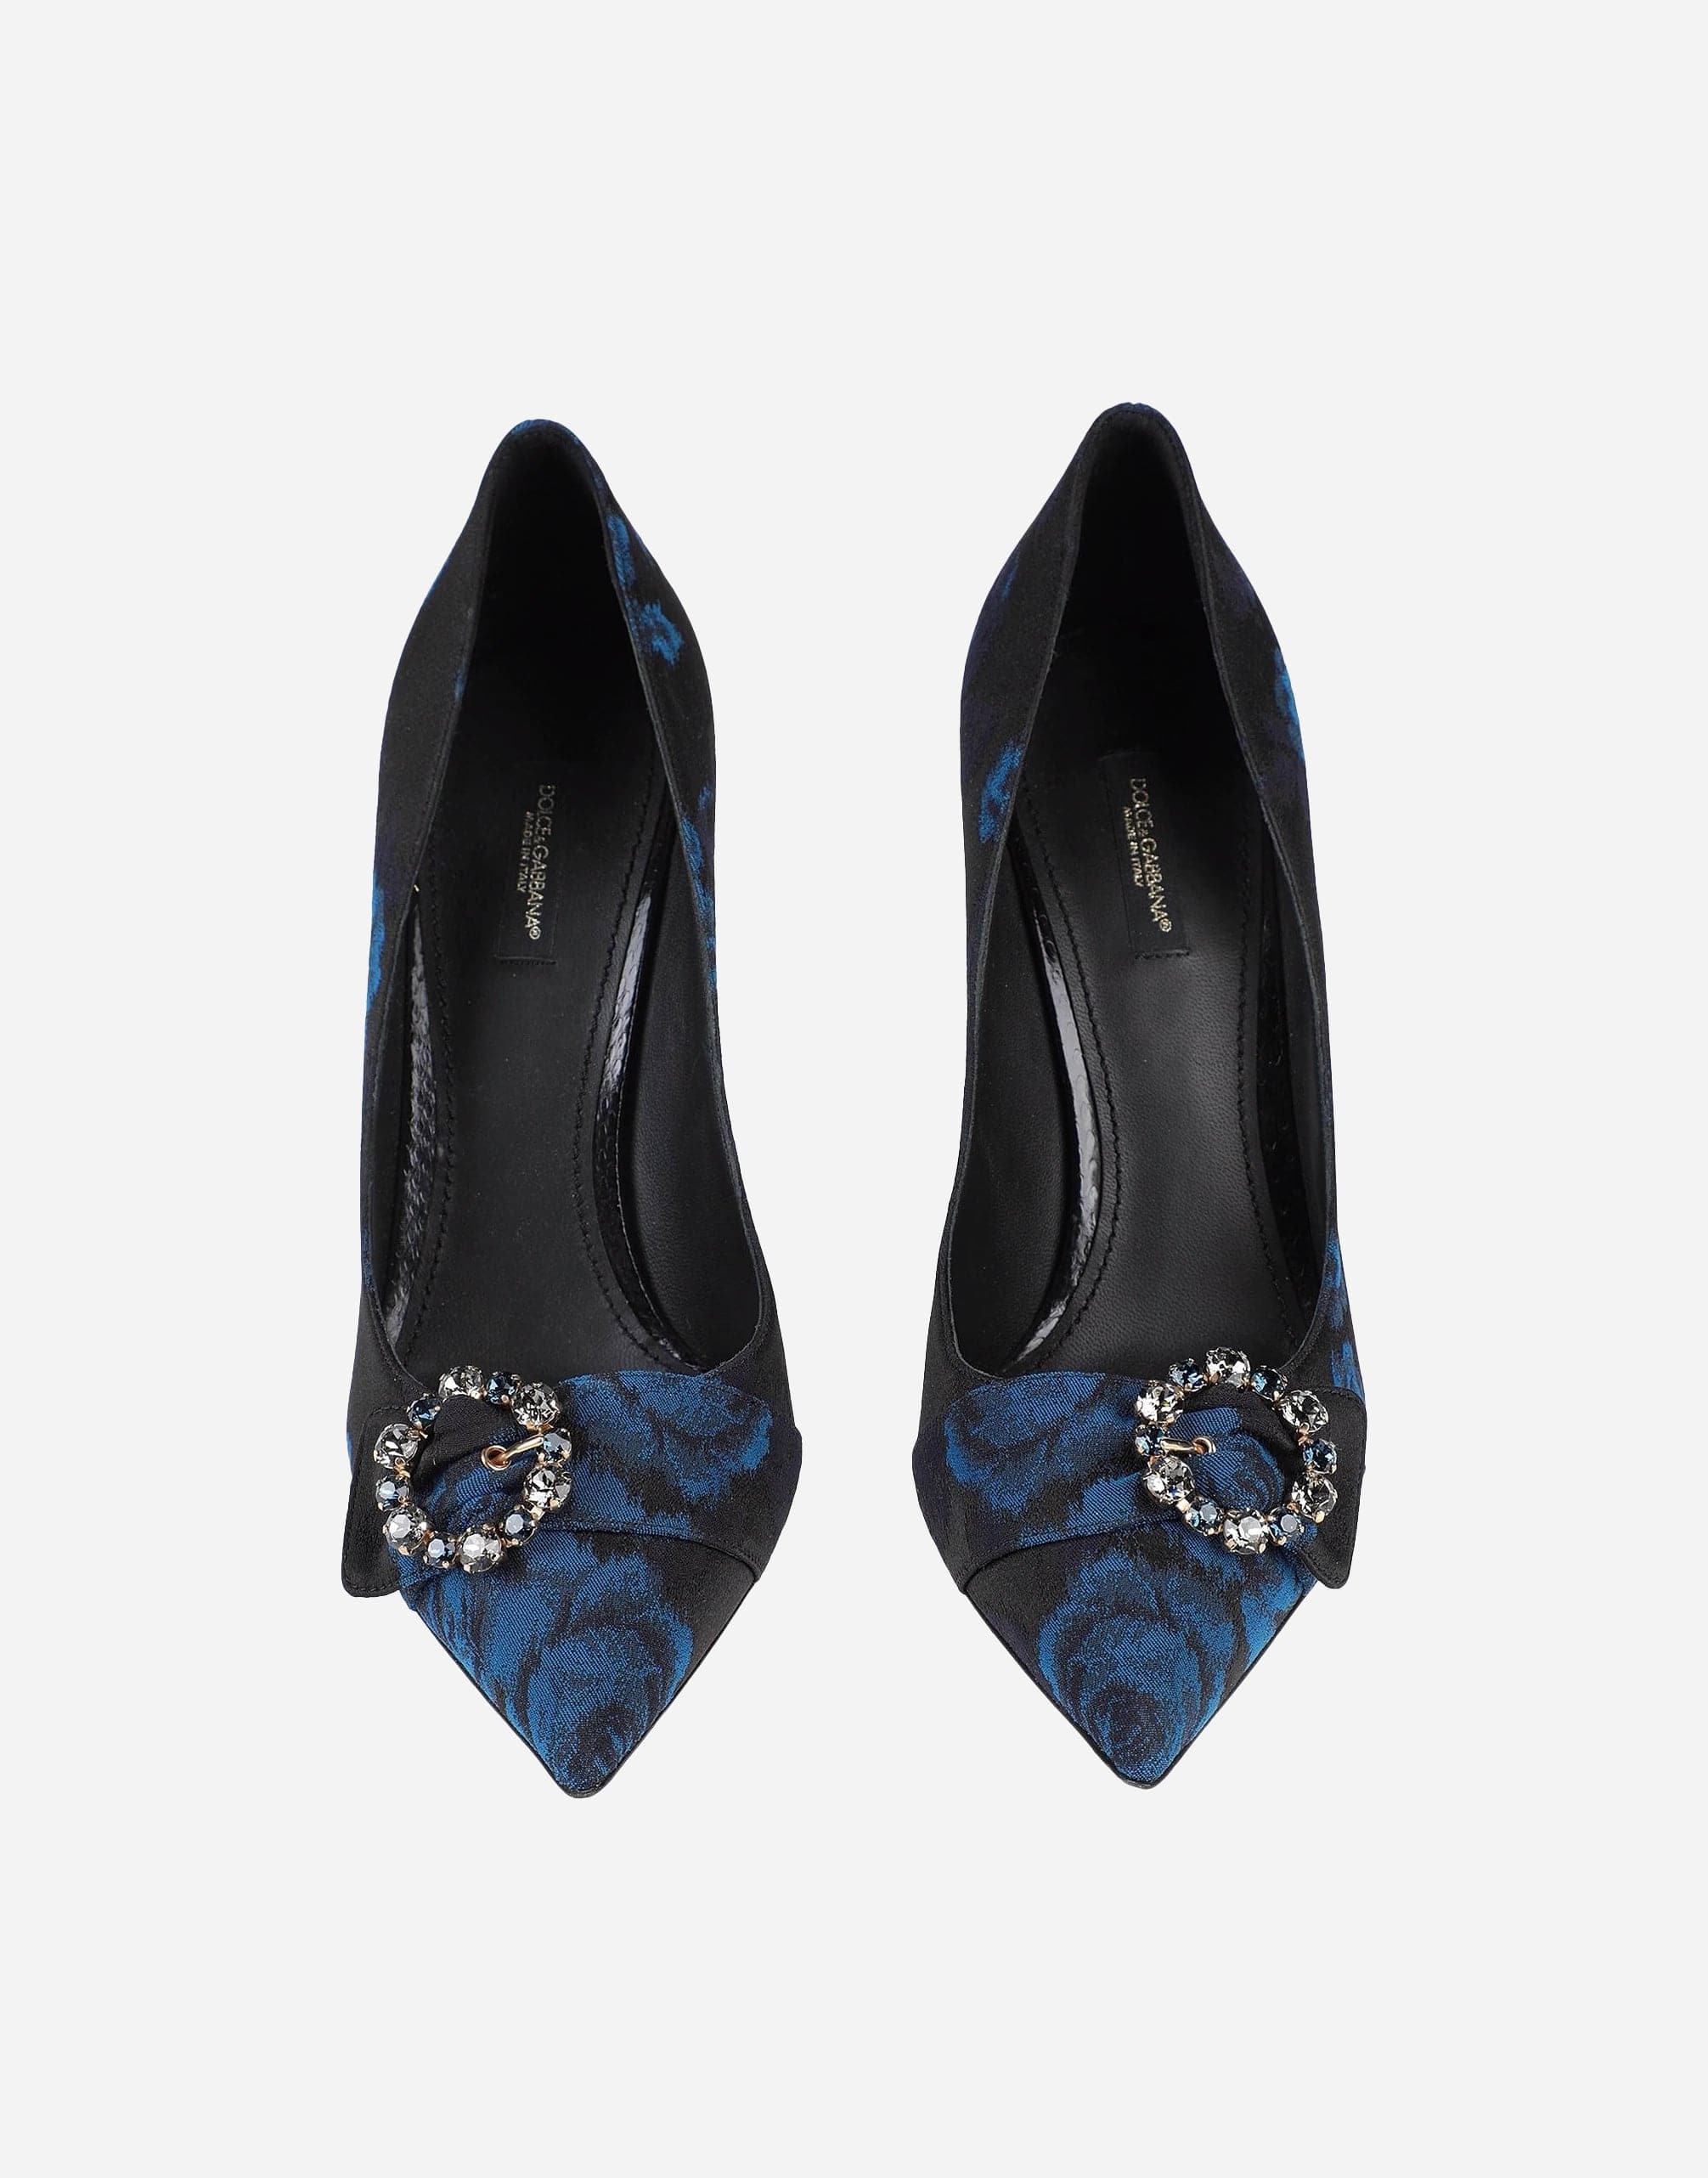 Dolce & Gabbana Blue Floral Ayers Crystal Pumps Shoes